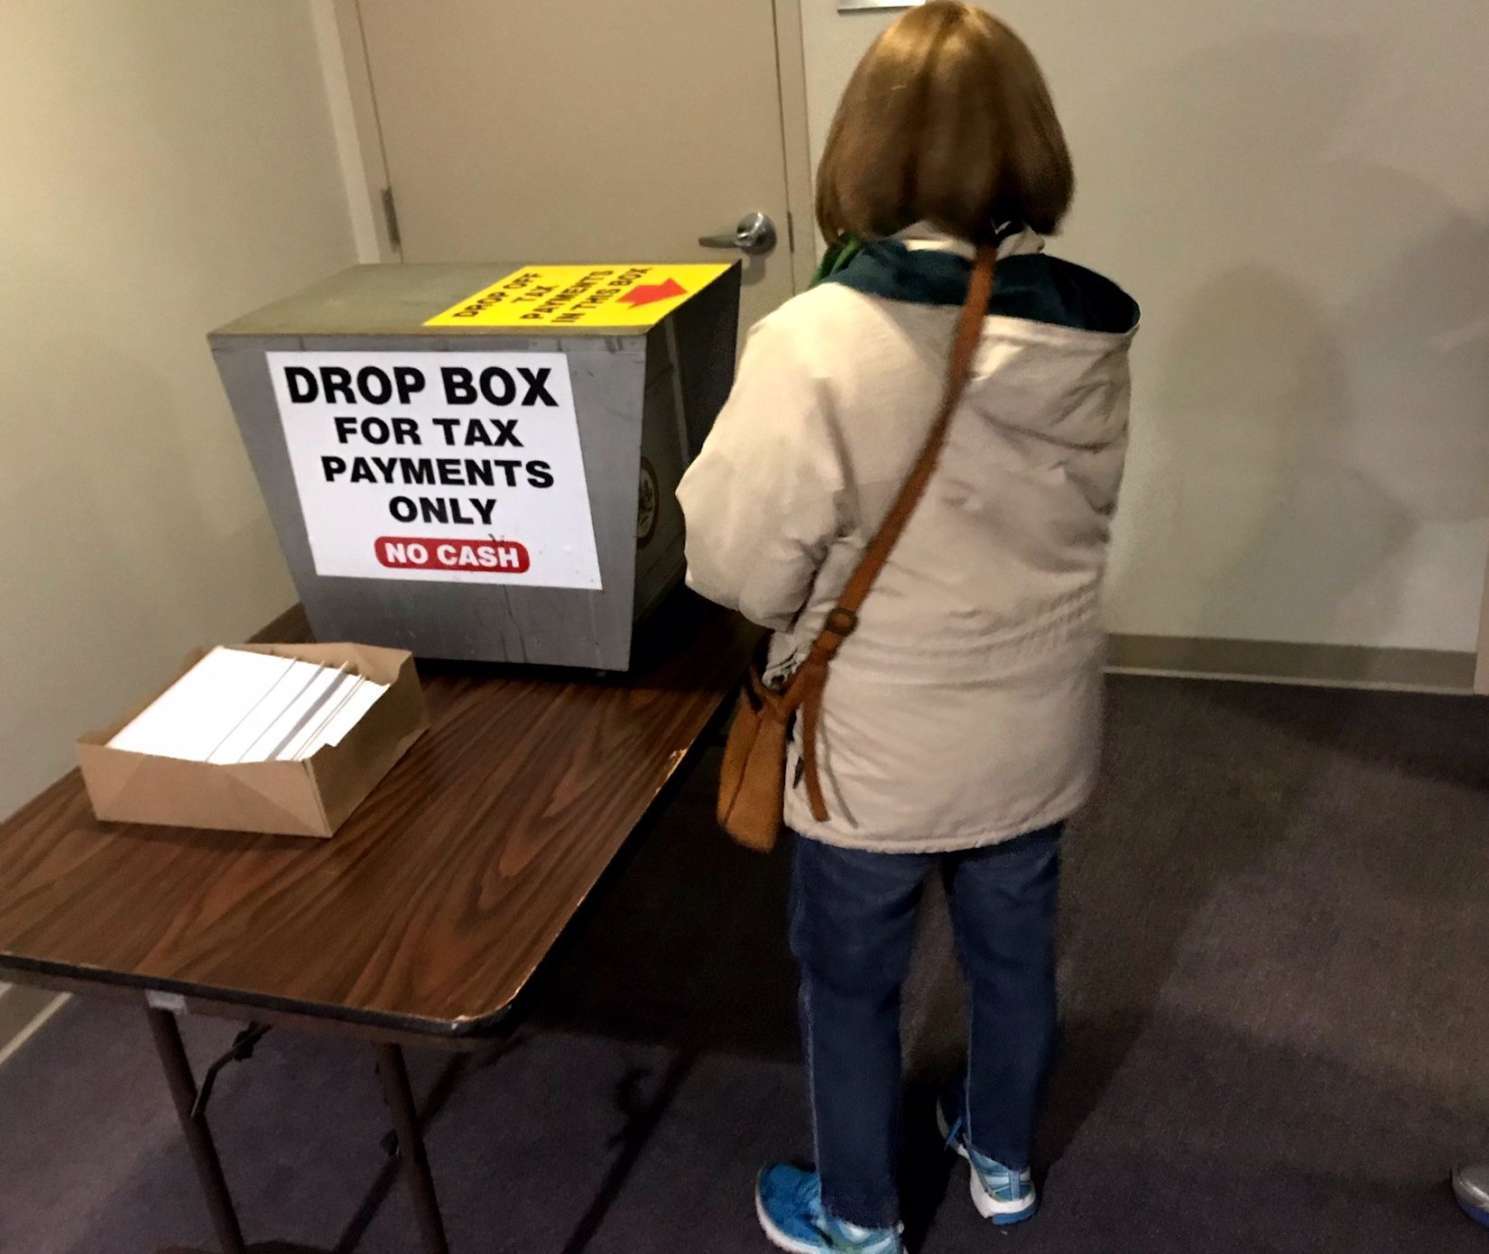 Interest is high in prepaying county property tax,
 ahead of a new tax law. Taxpayers in Fairfax Co. can drop off a check in the county government building.
 (WTOP/Neal Augenstein)